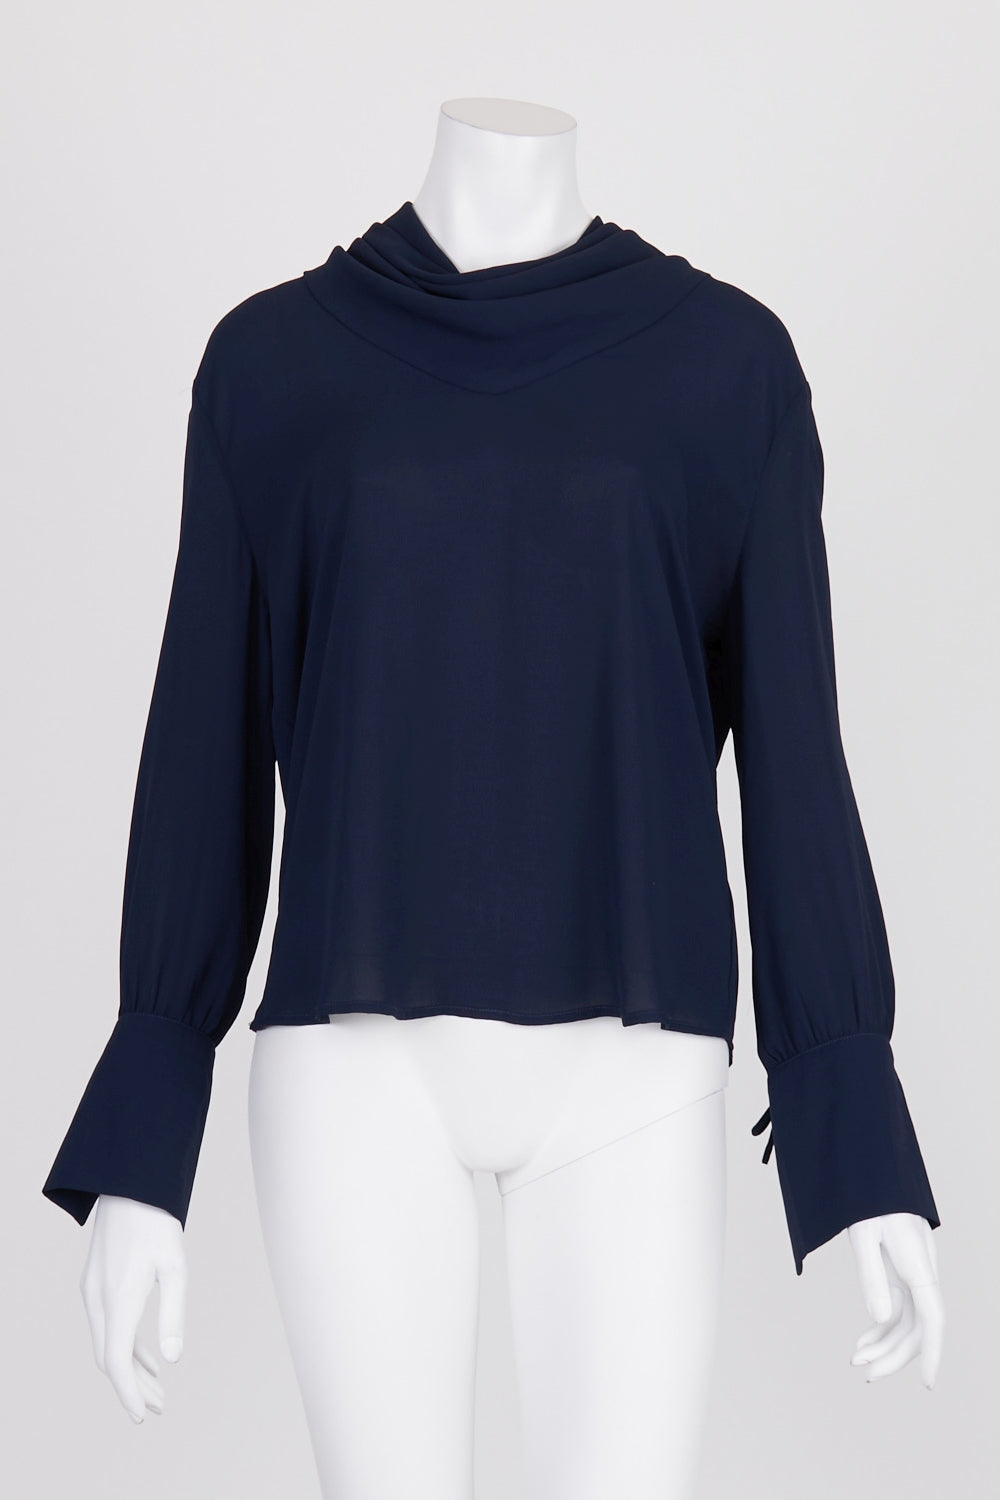 Airlie Navy Cowl Neck Top 12